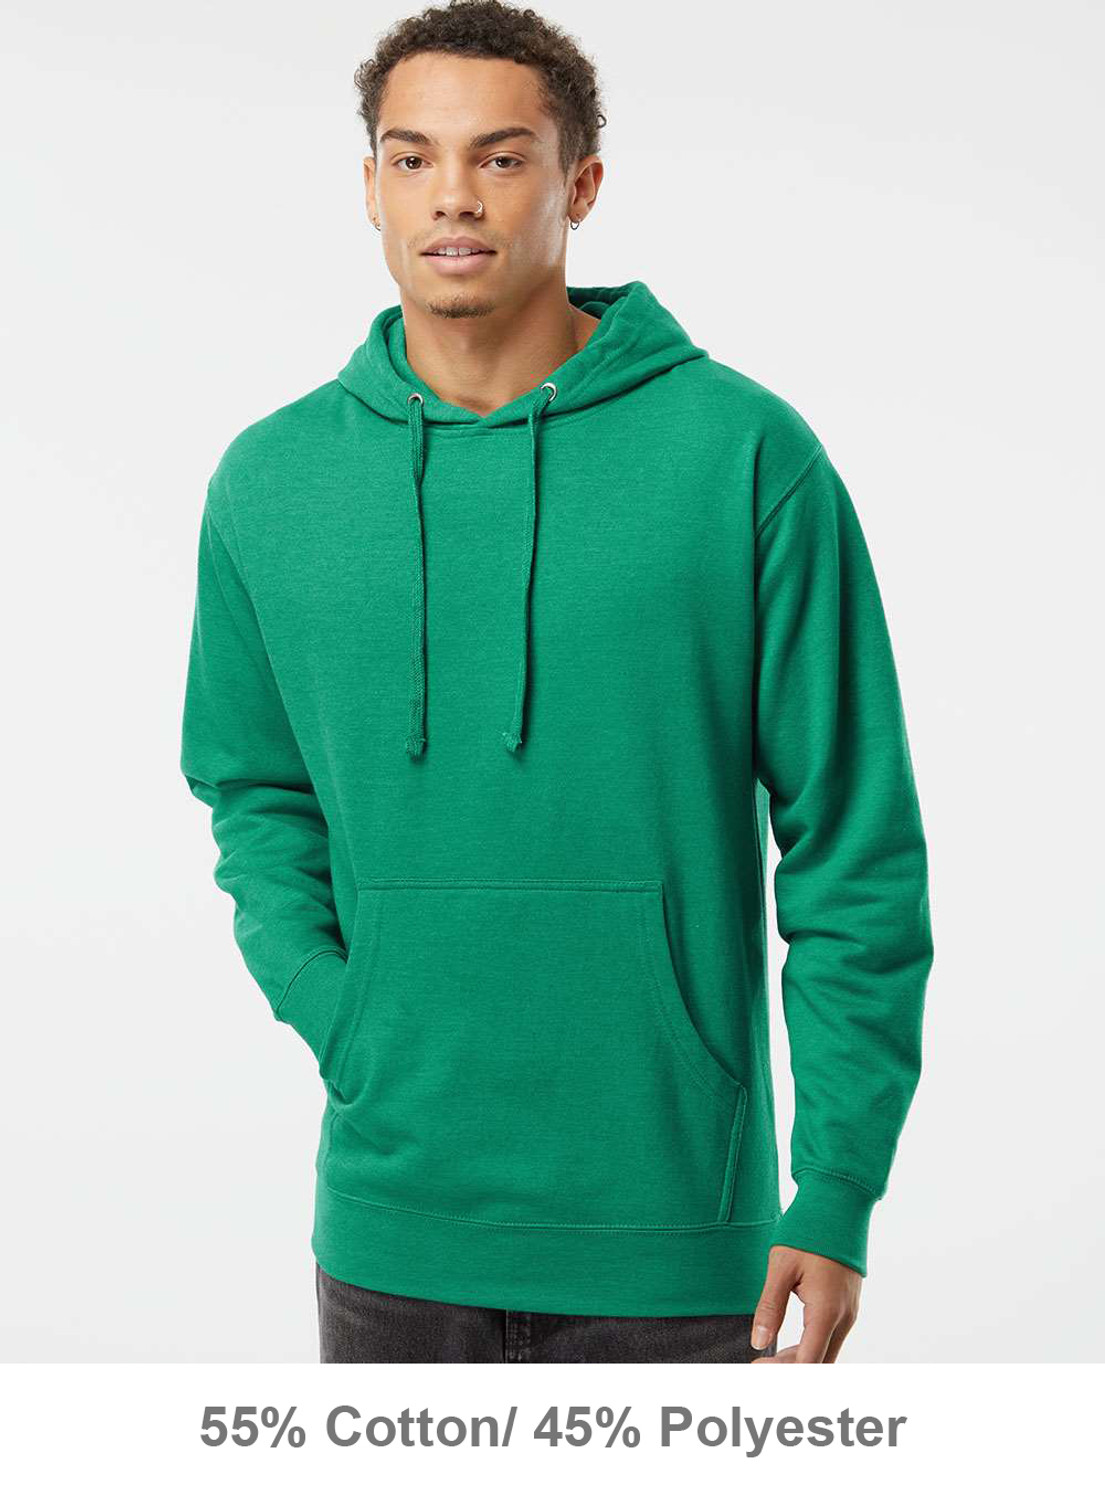 Independent Trading Co. SS4500 Adult Midweight Hoodie